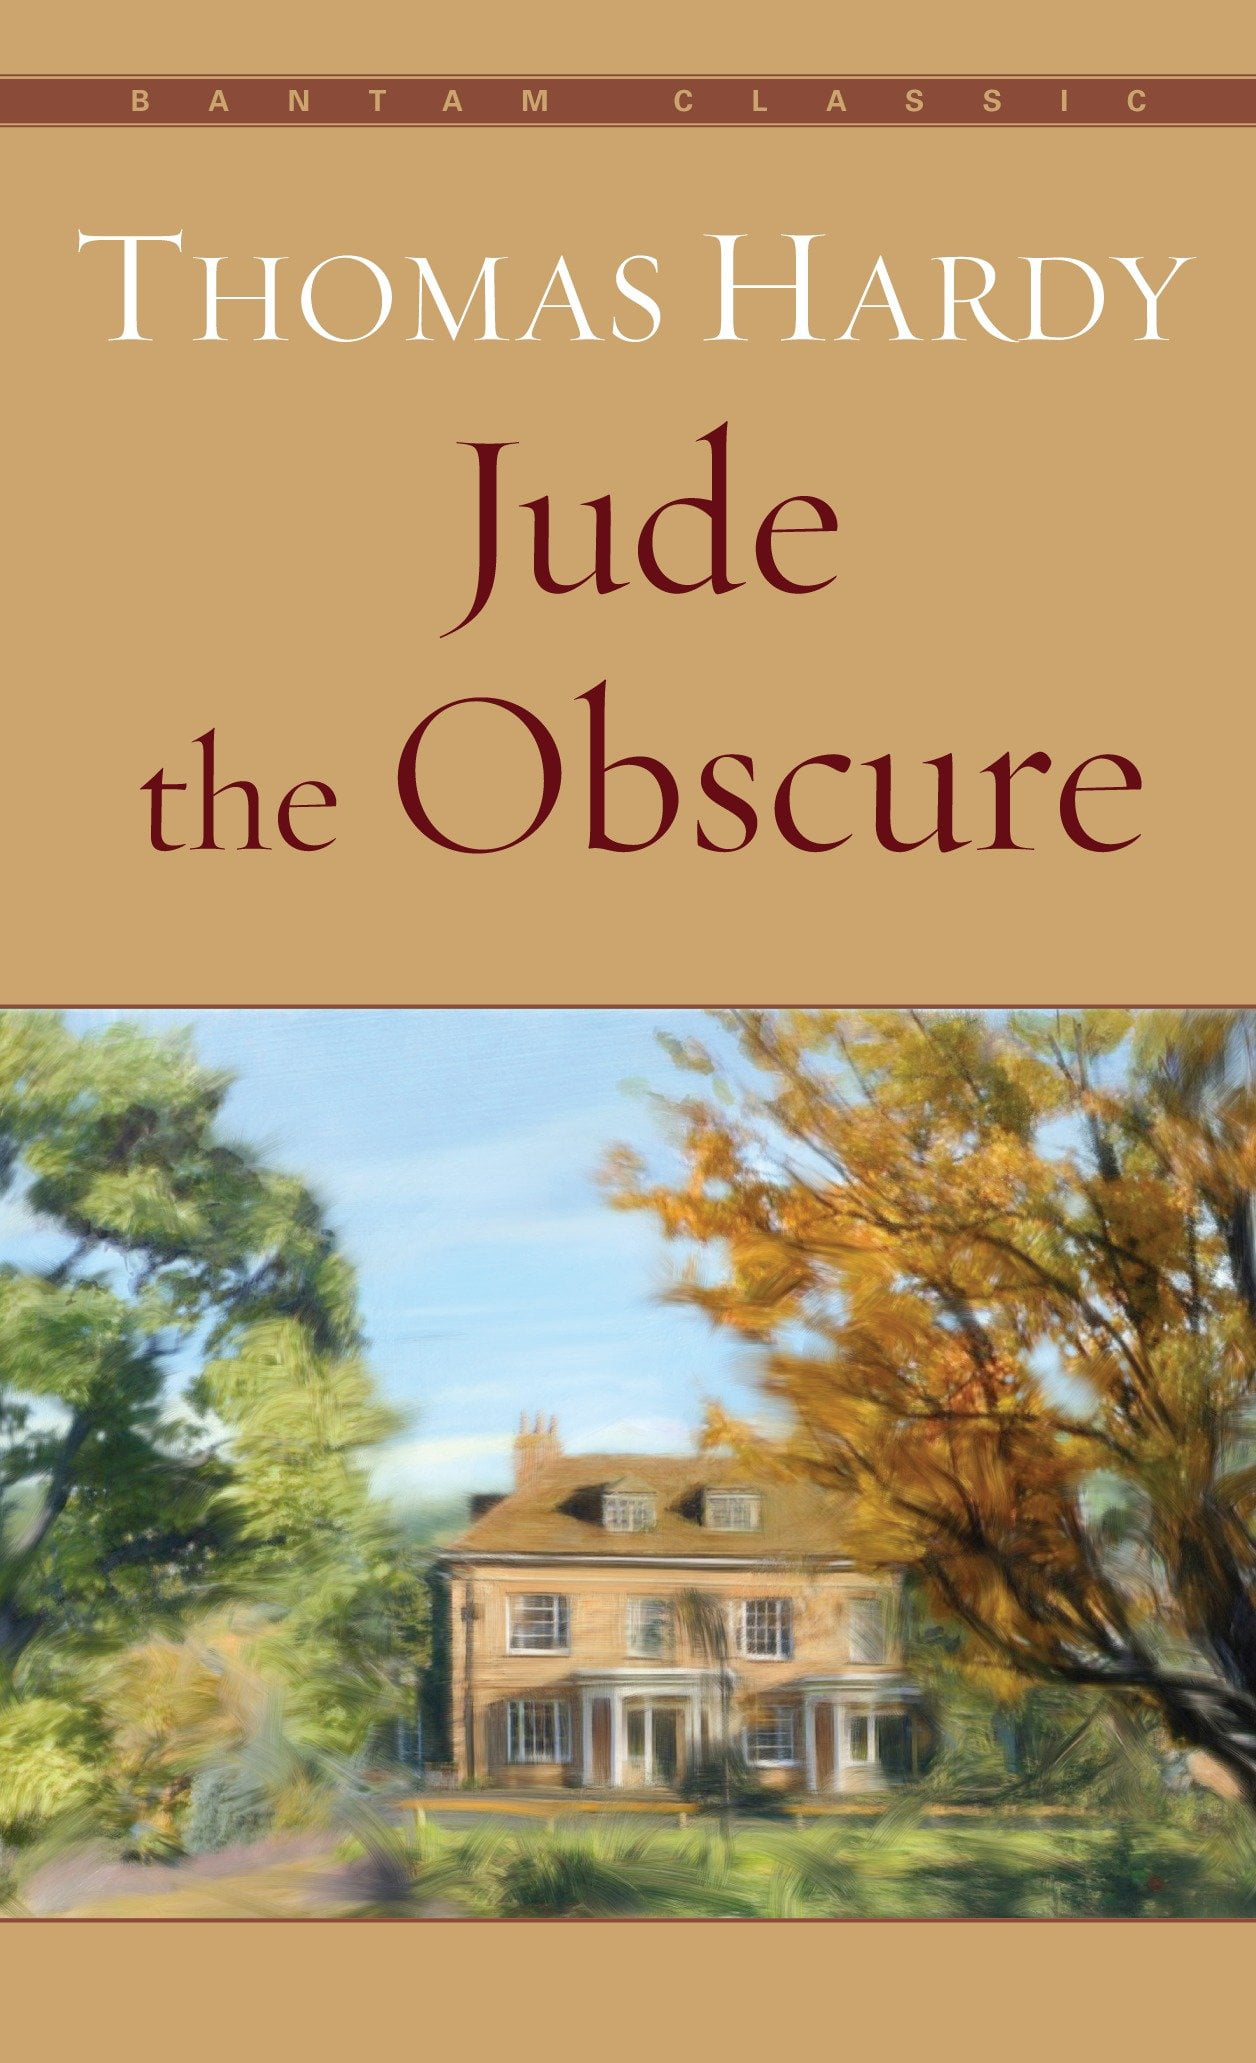 jude and obscure